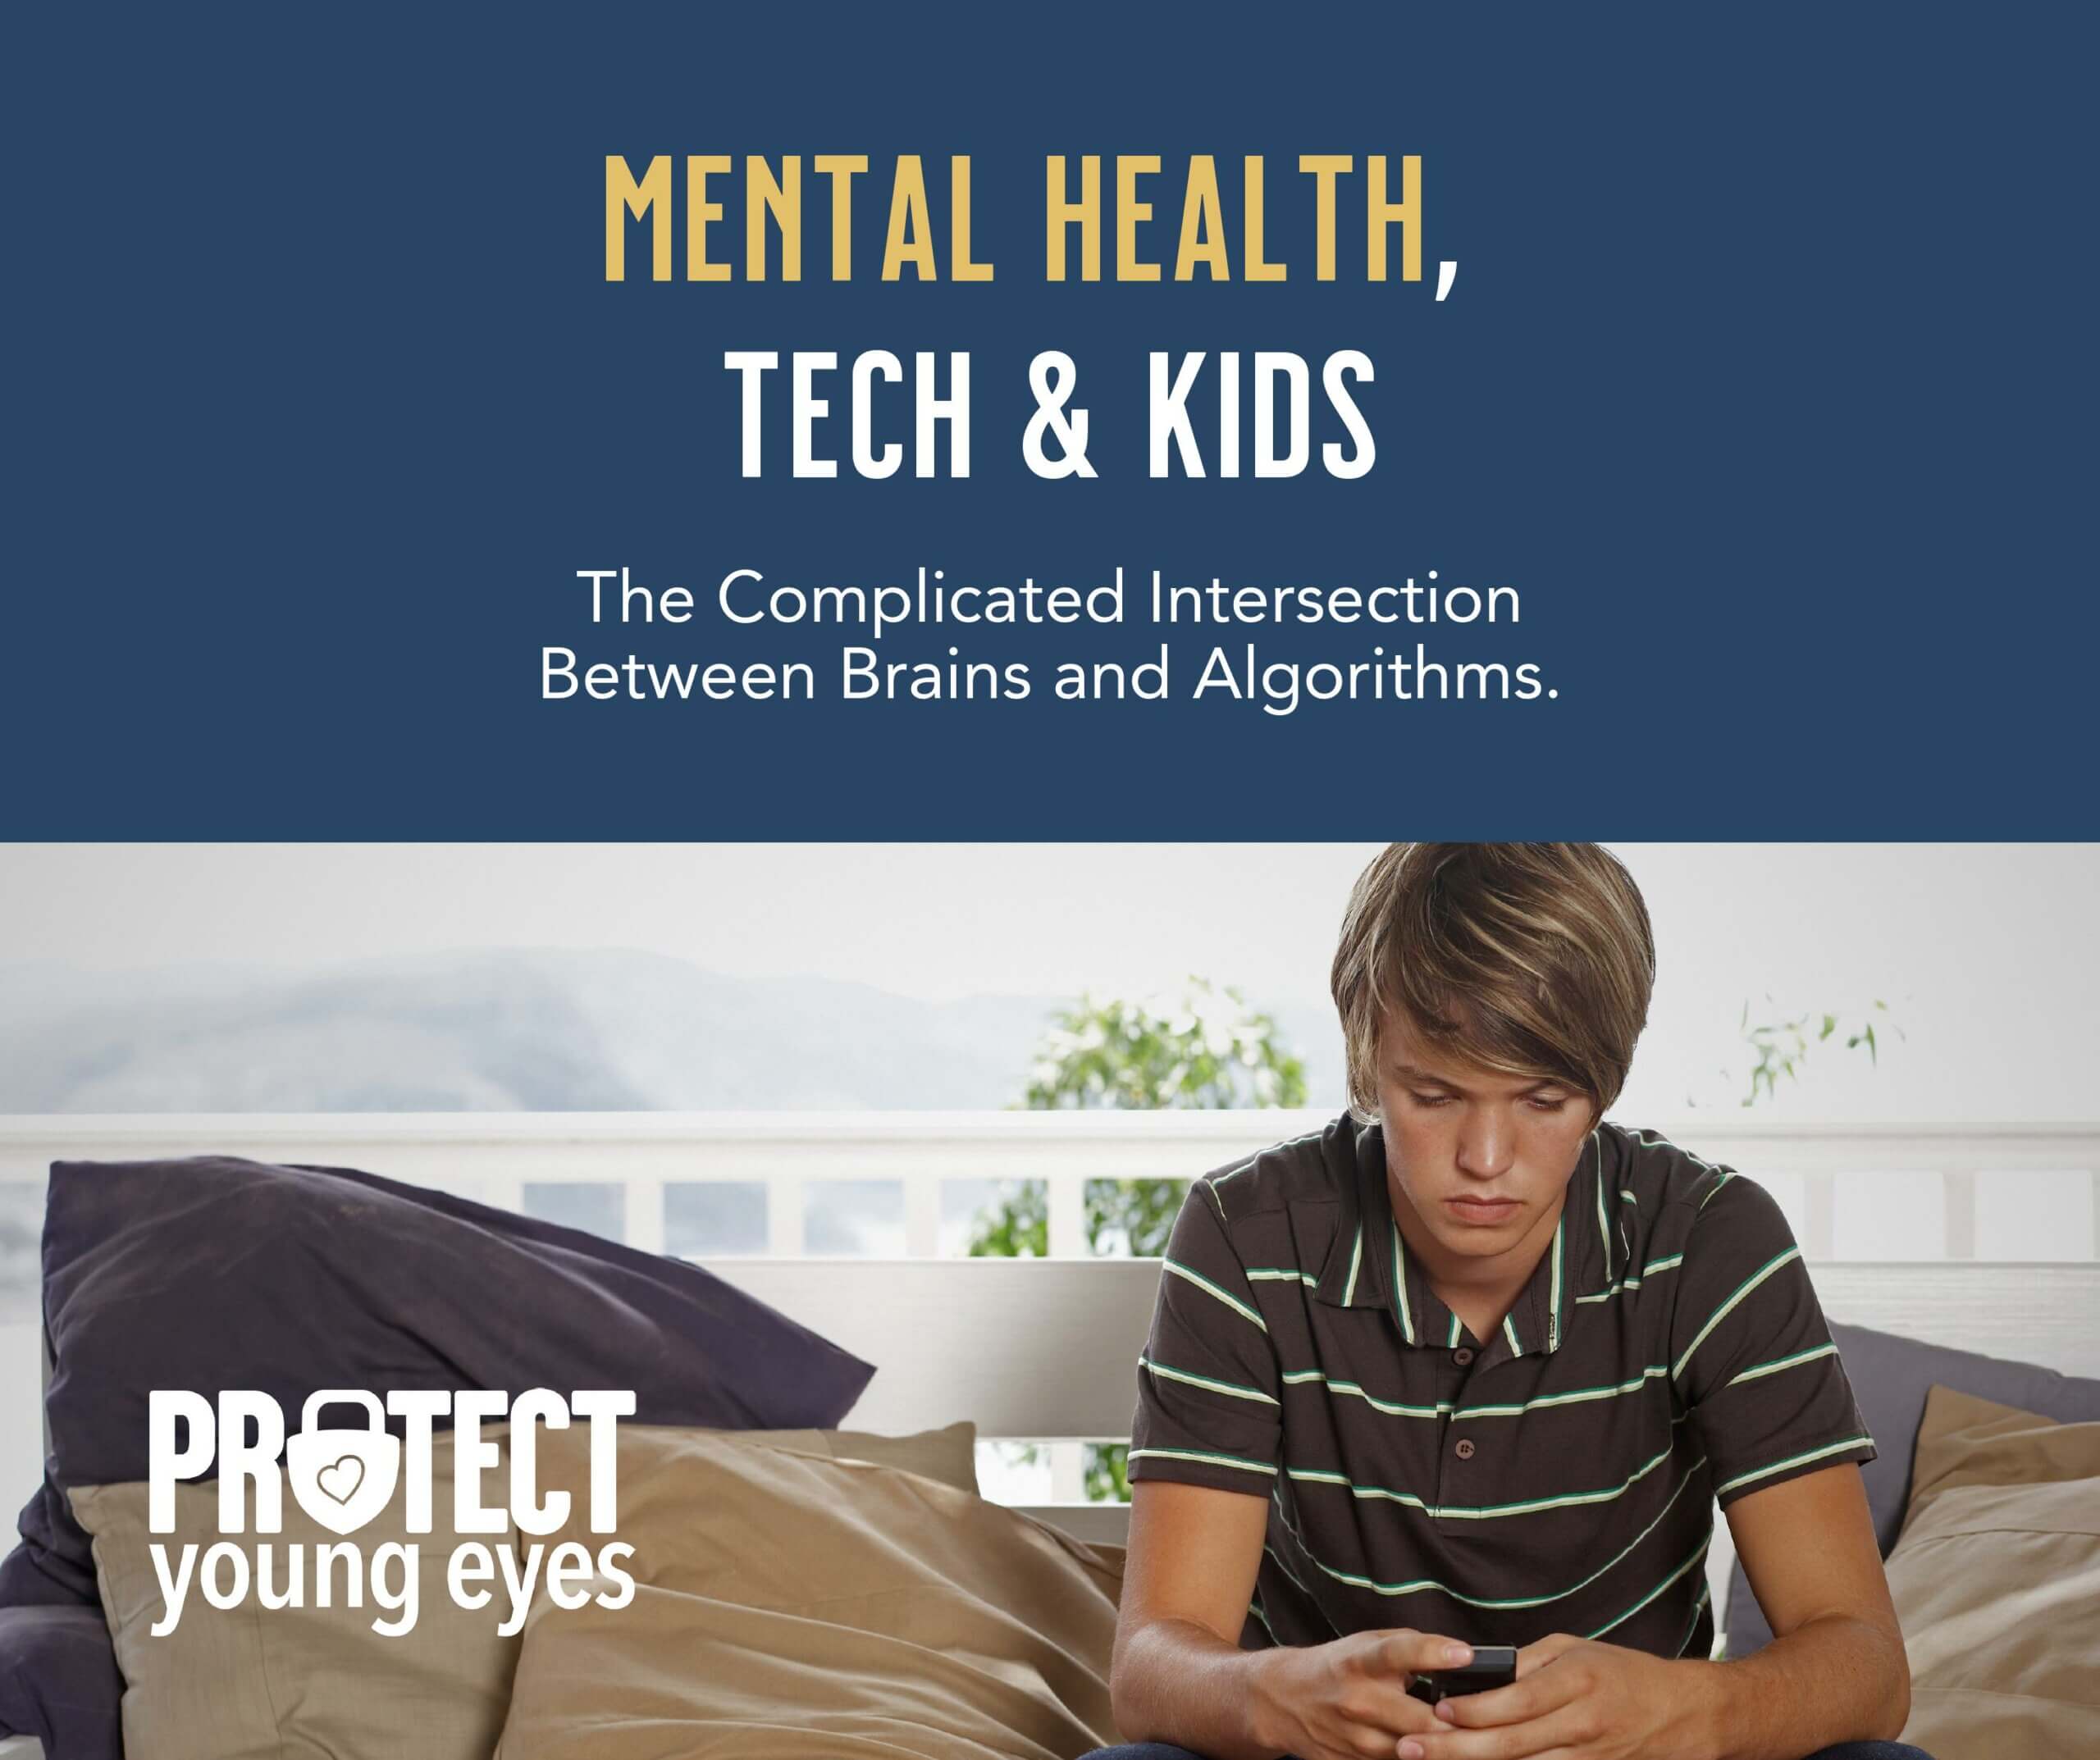 Parent Digital Safety Presentations - Protect Young Eyes